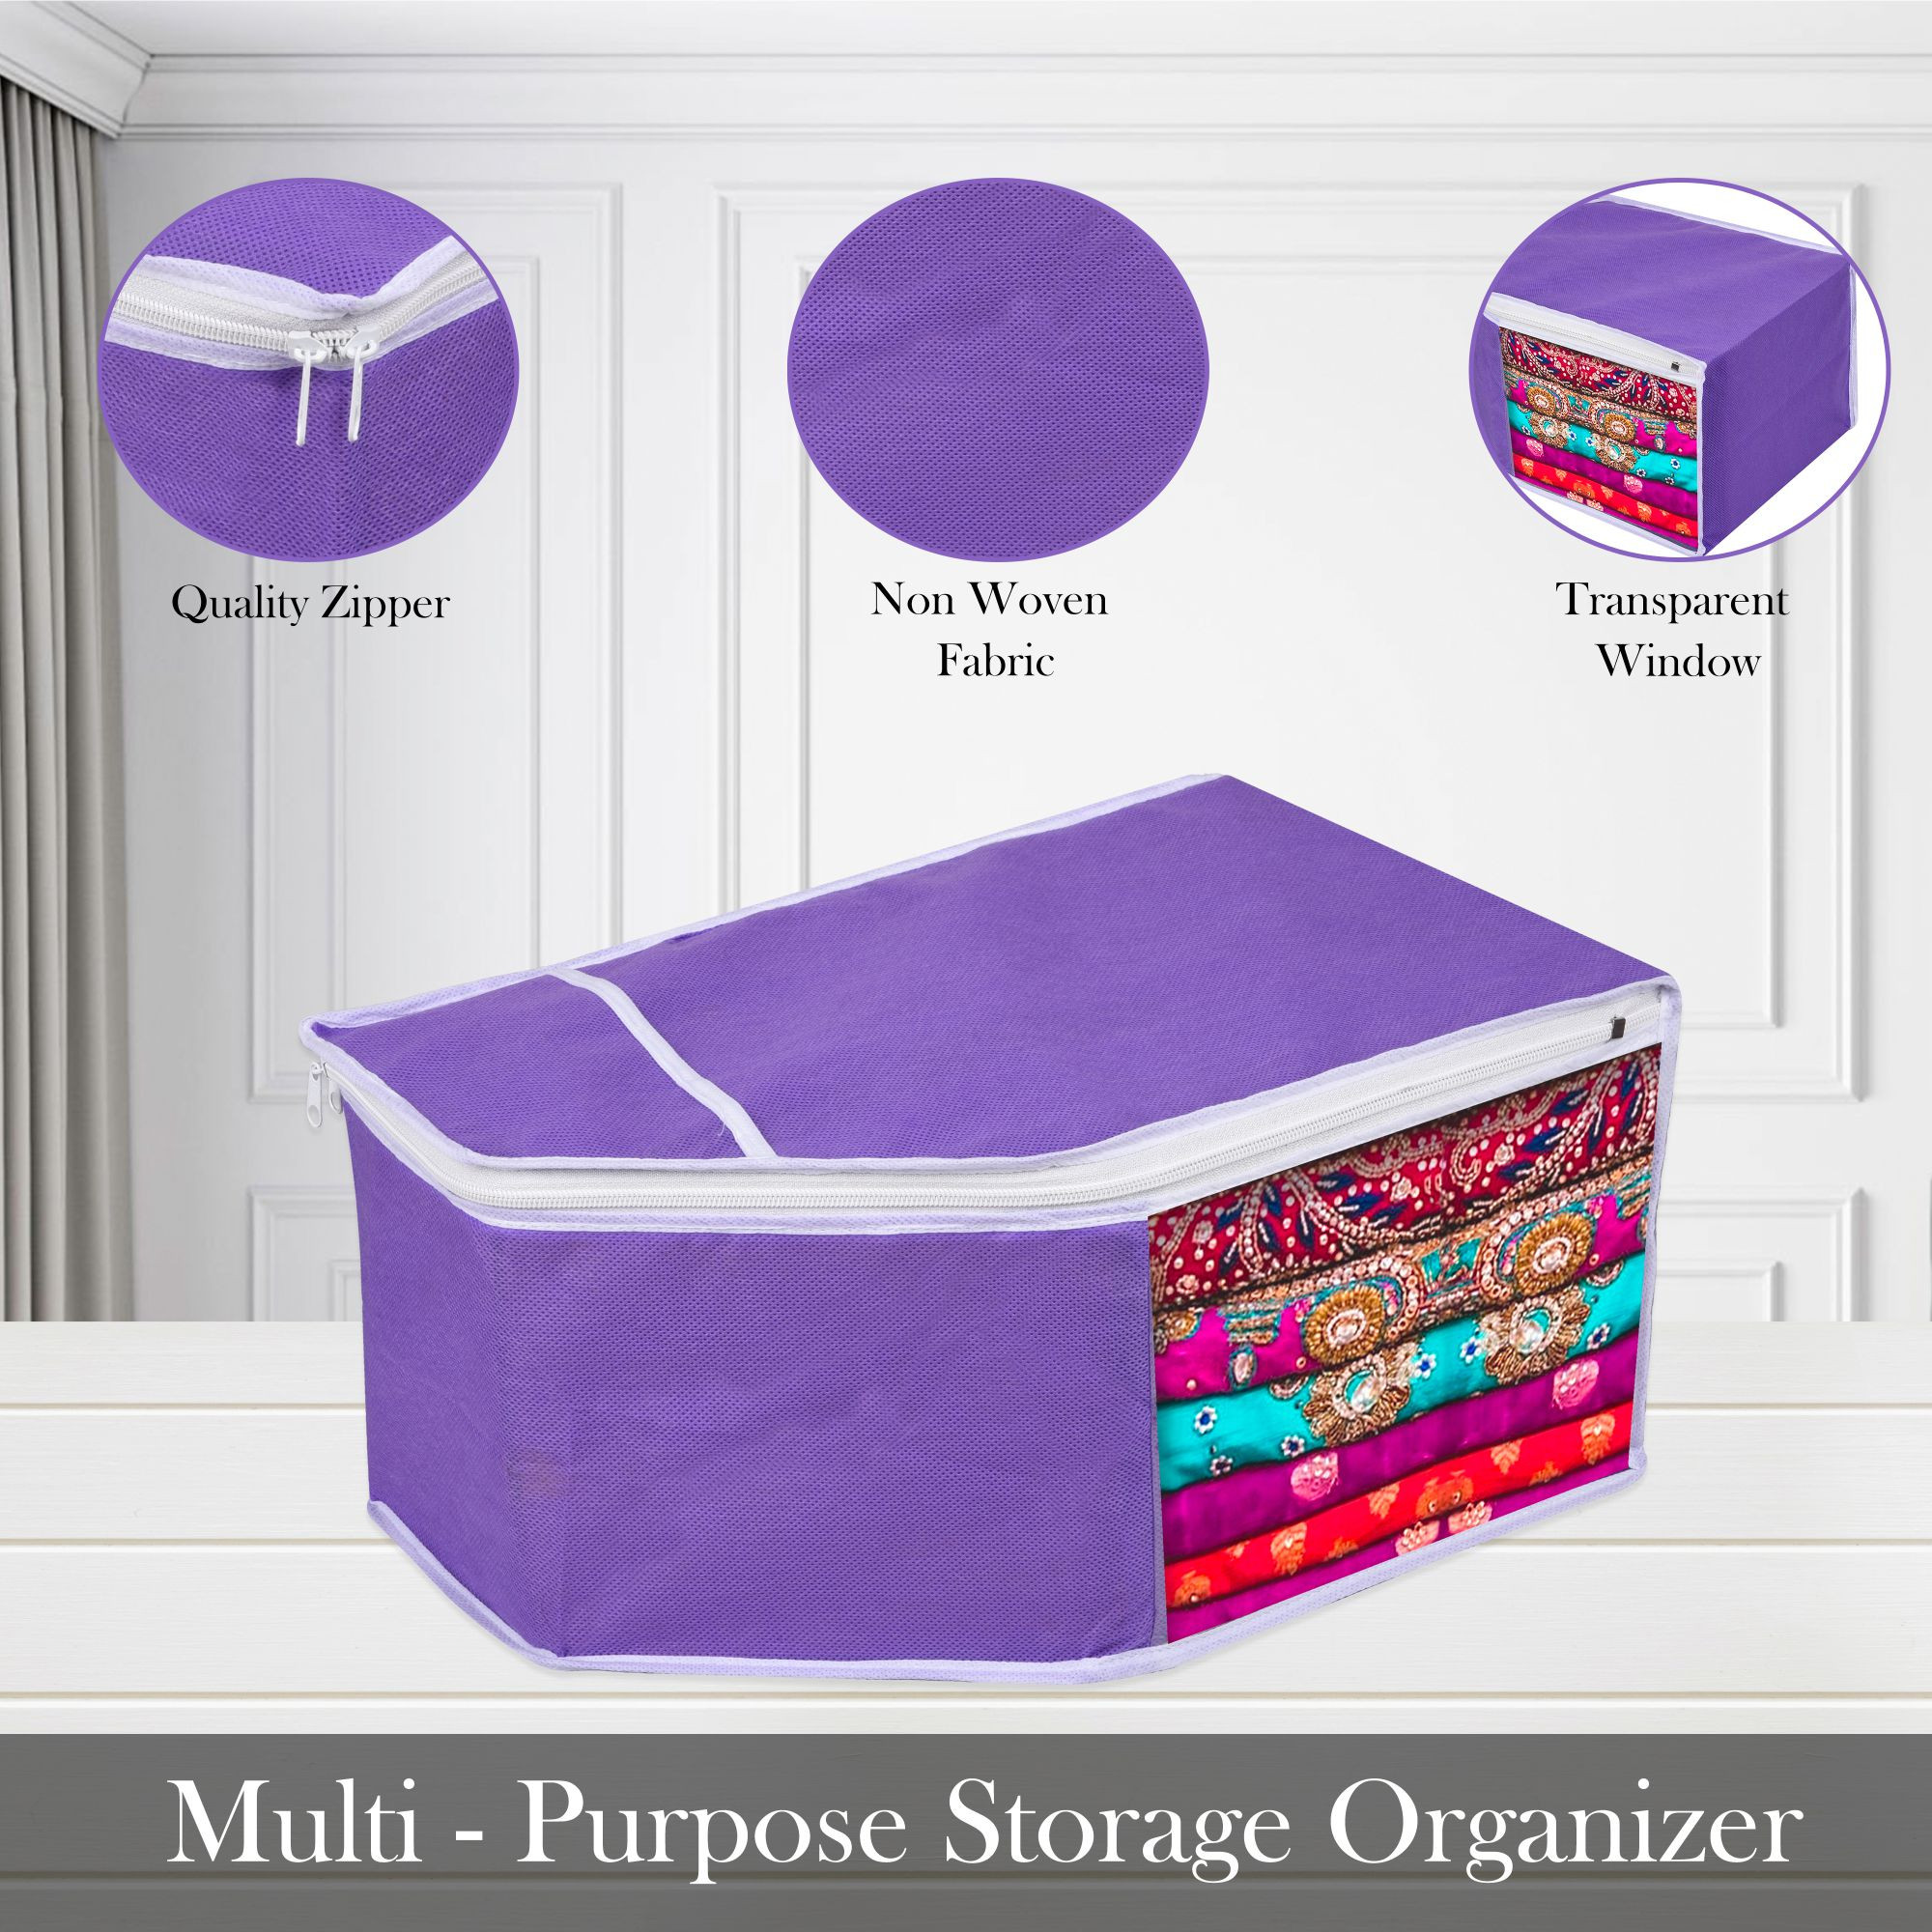 Kuber Industries Blouse Storage Bag | Clothes Storage Bag | Visible Window Wardrobe Bag | Clothes Organizer | Blouse Cover Bag for Travel | White Piping |Purple